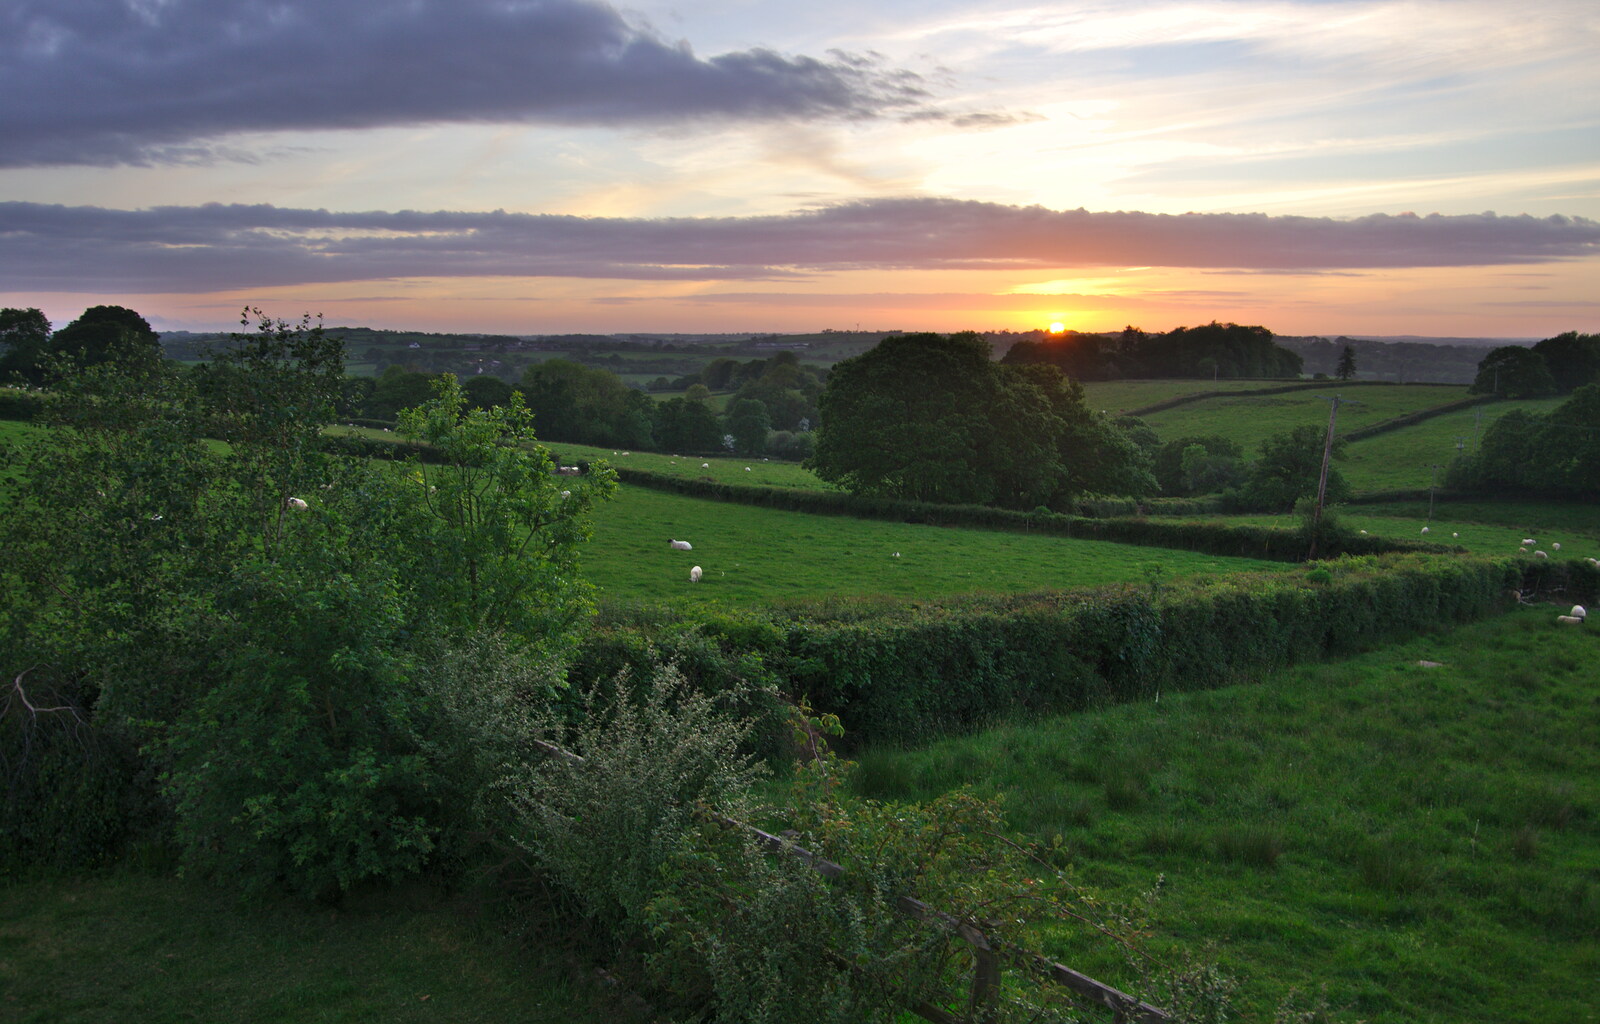 There's a nice sunset view towards the Taw Valley from The Tom Cobley and a Return to Haytor, Bovey Tracey, Devon - 27th May 2019